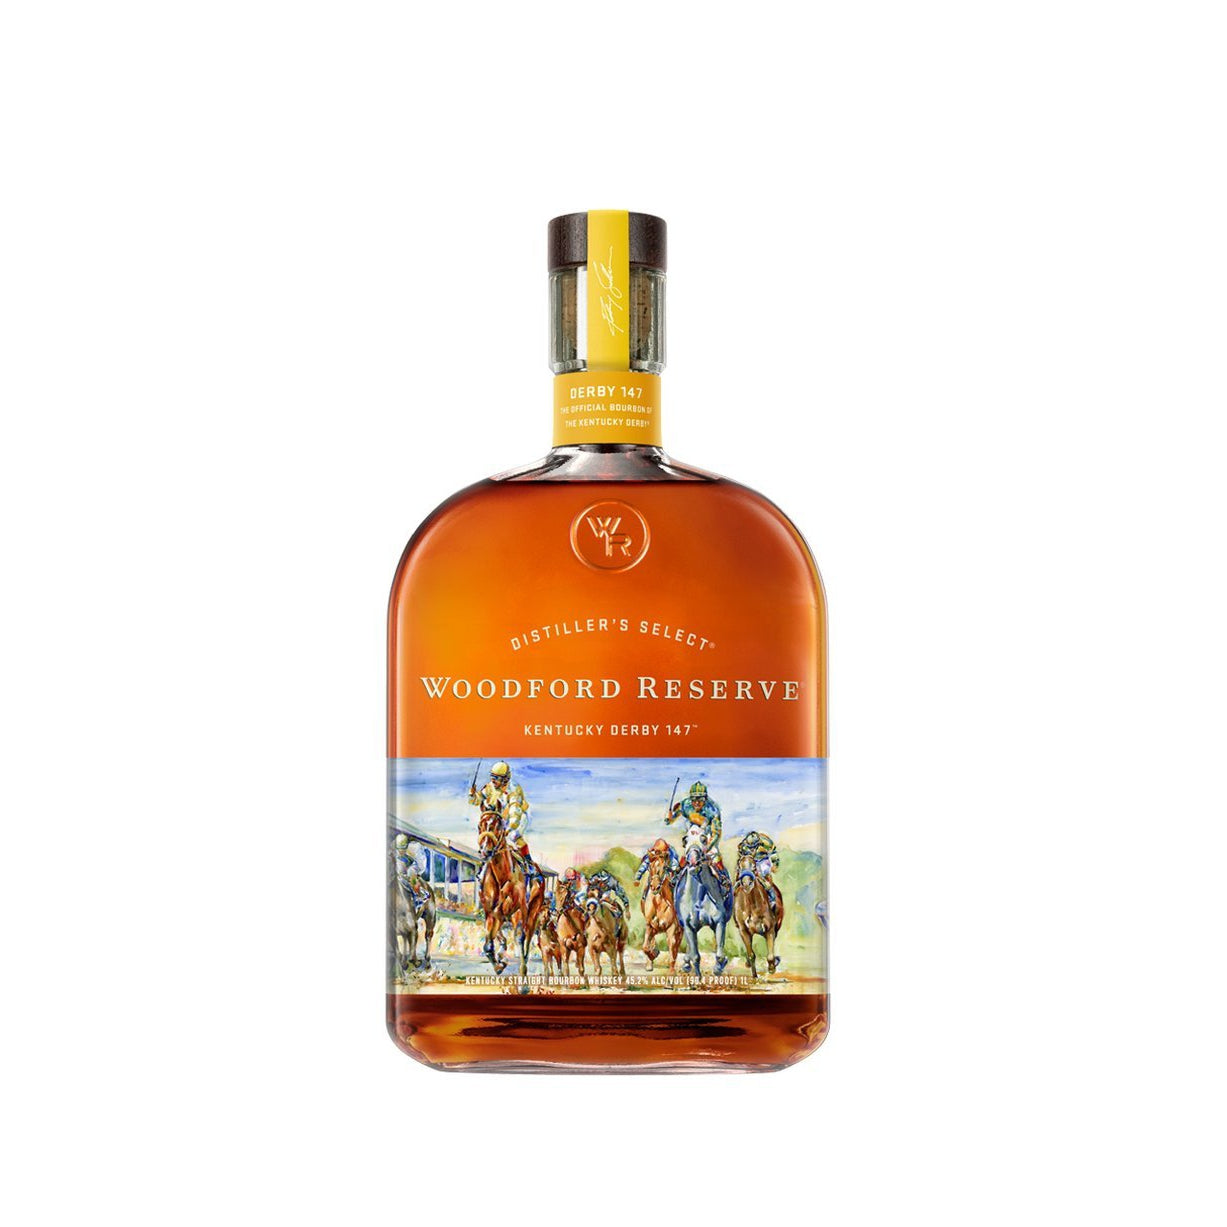 Woodford Reserve 2021 Limited Release Kentucky Derby 147 Bourbon Whiskey 1L